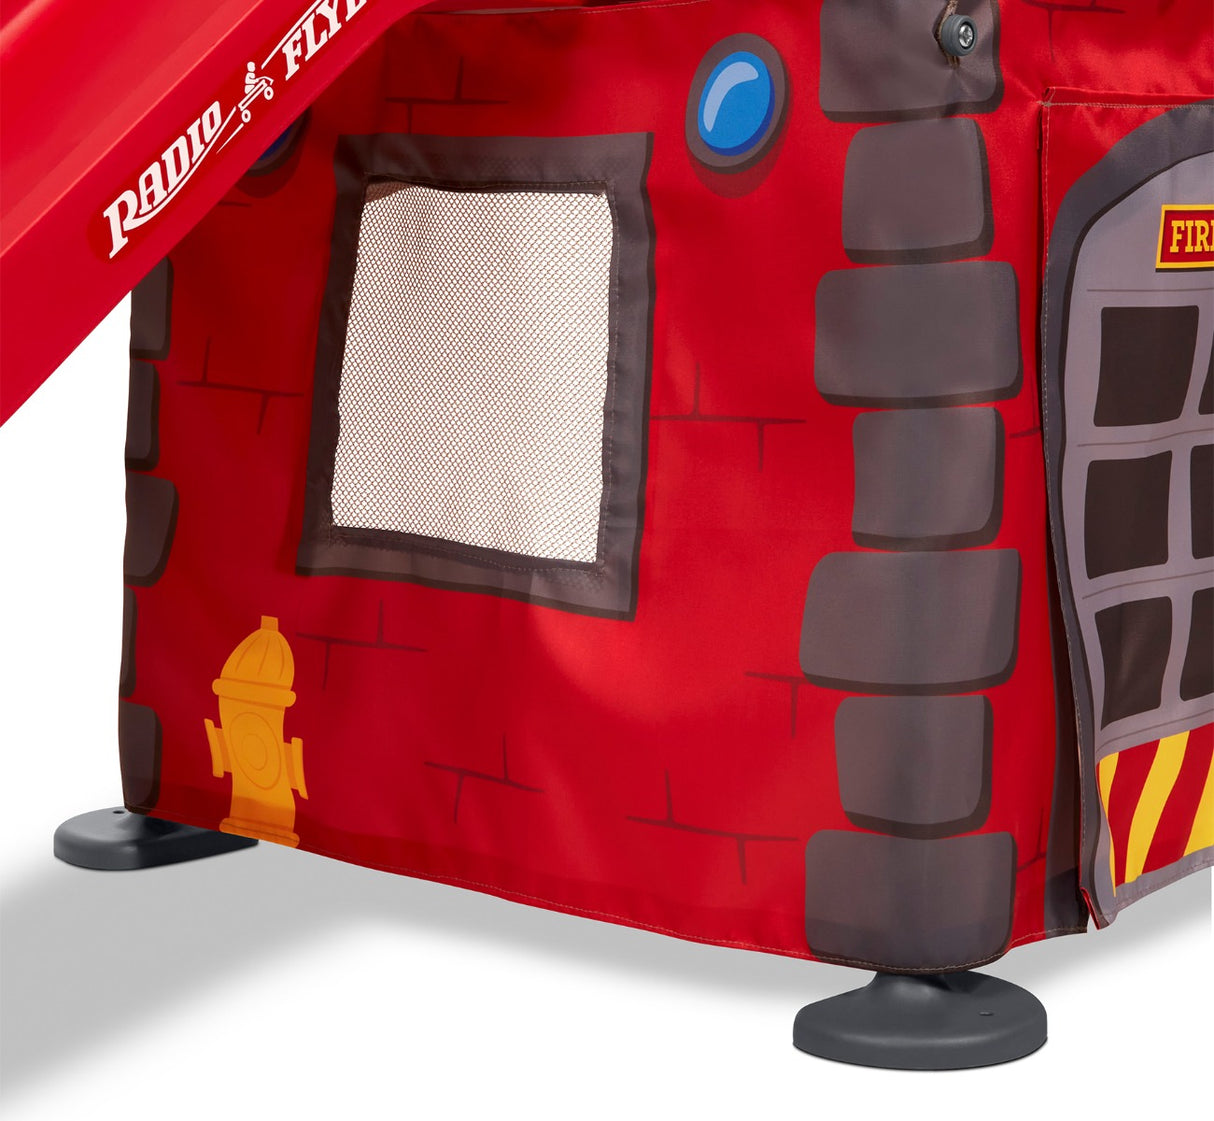 Play & Fold Away Fire Station's Secret Underneath Play Space With Two Doors And Two Mesh Windows